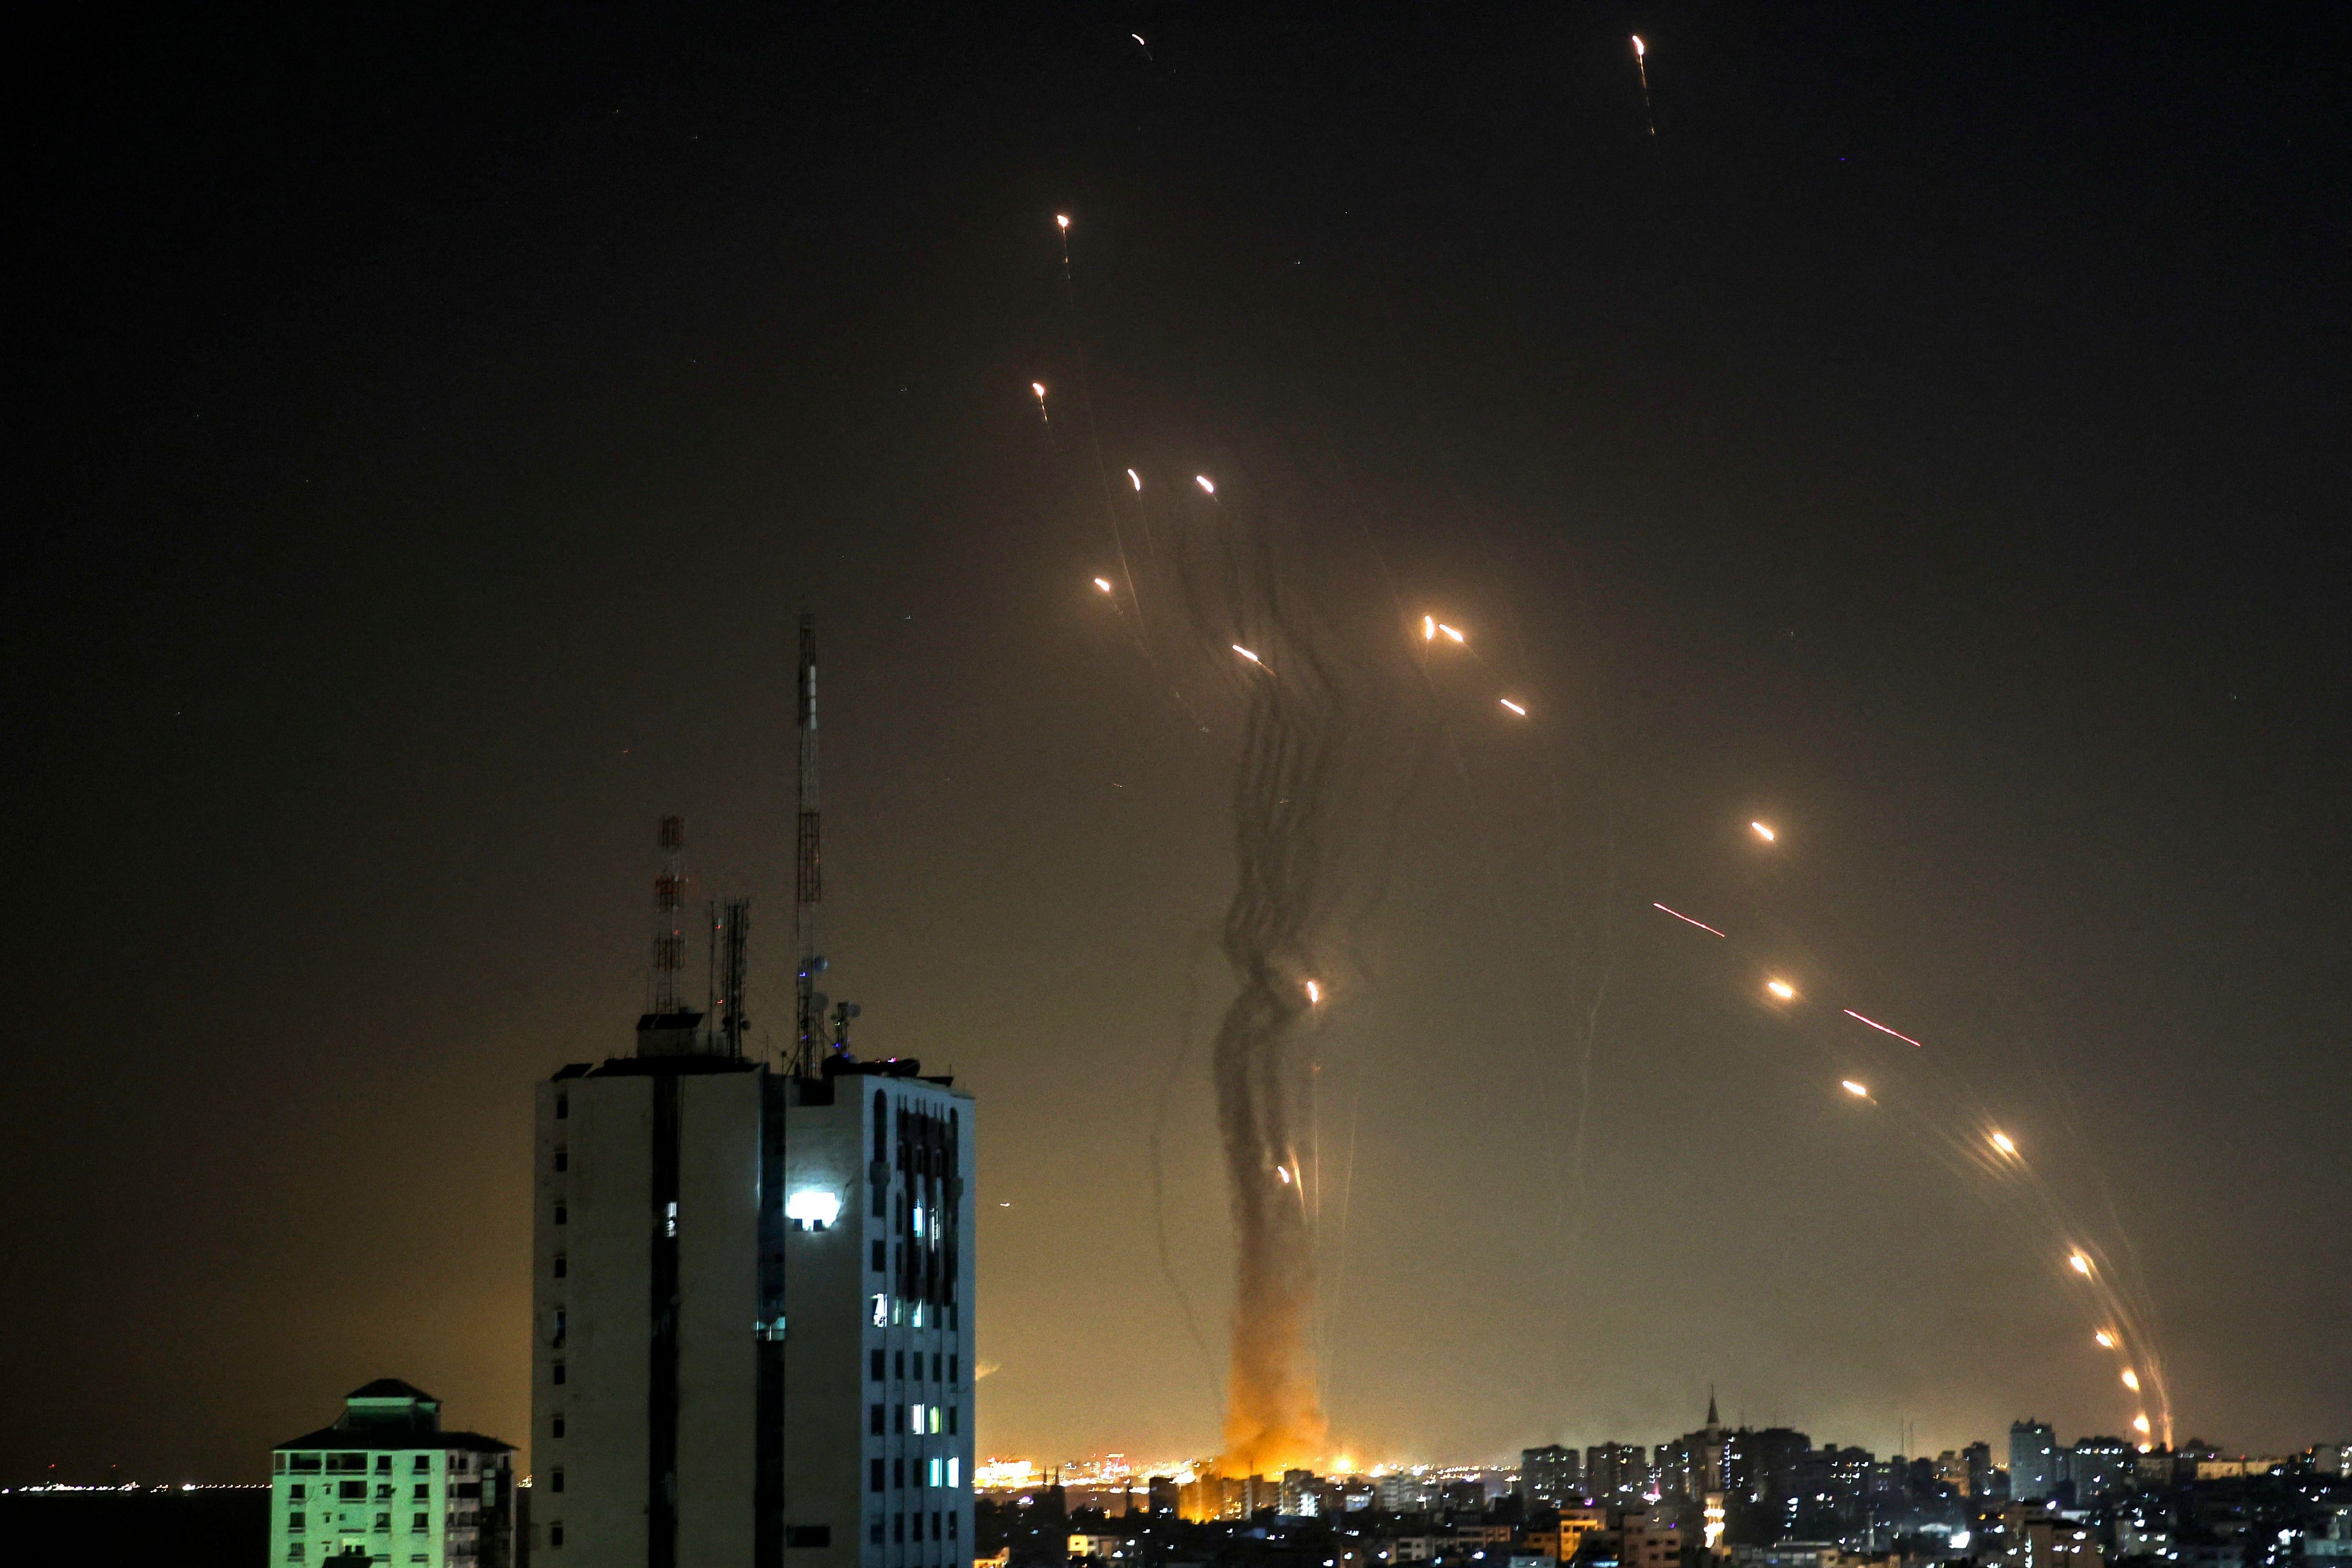 Explosions in an arc across the night sky over Gaza.